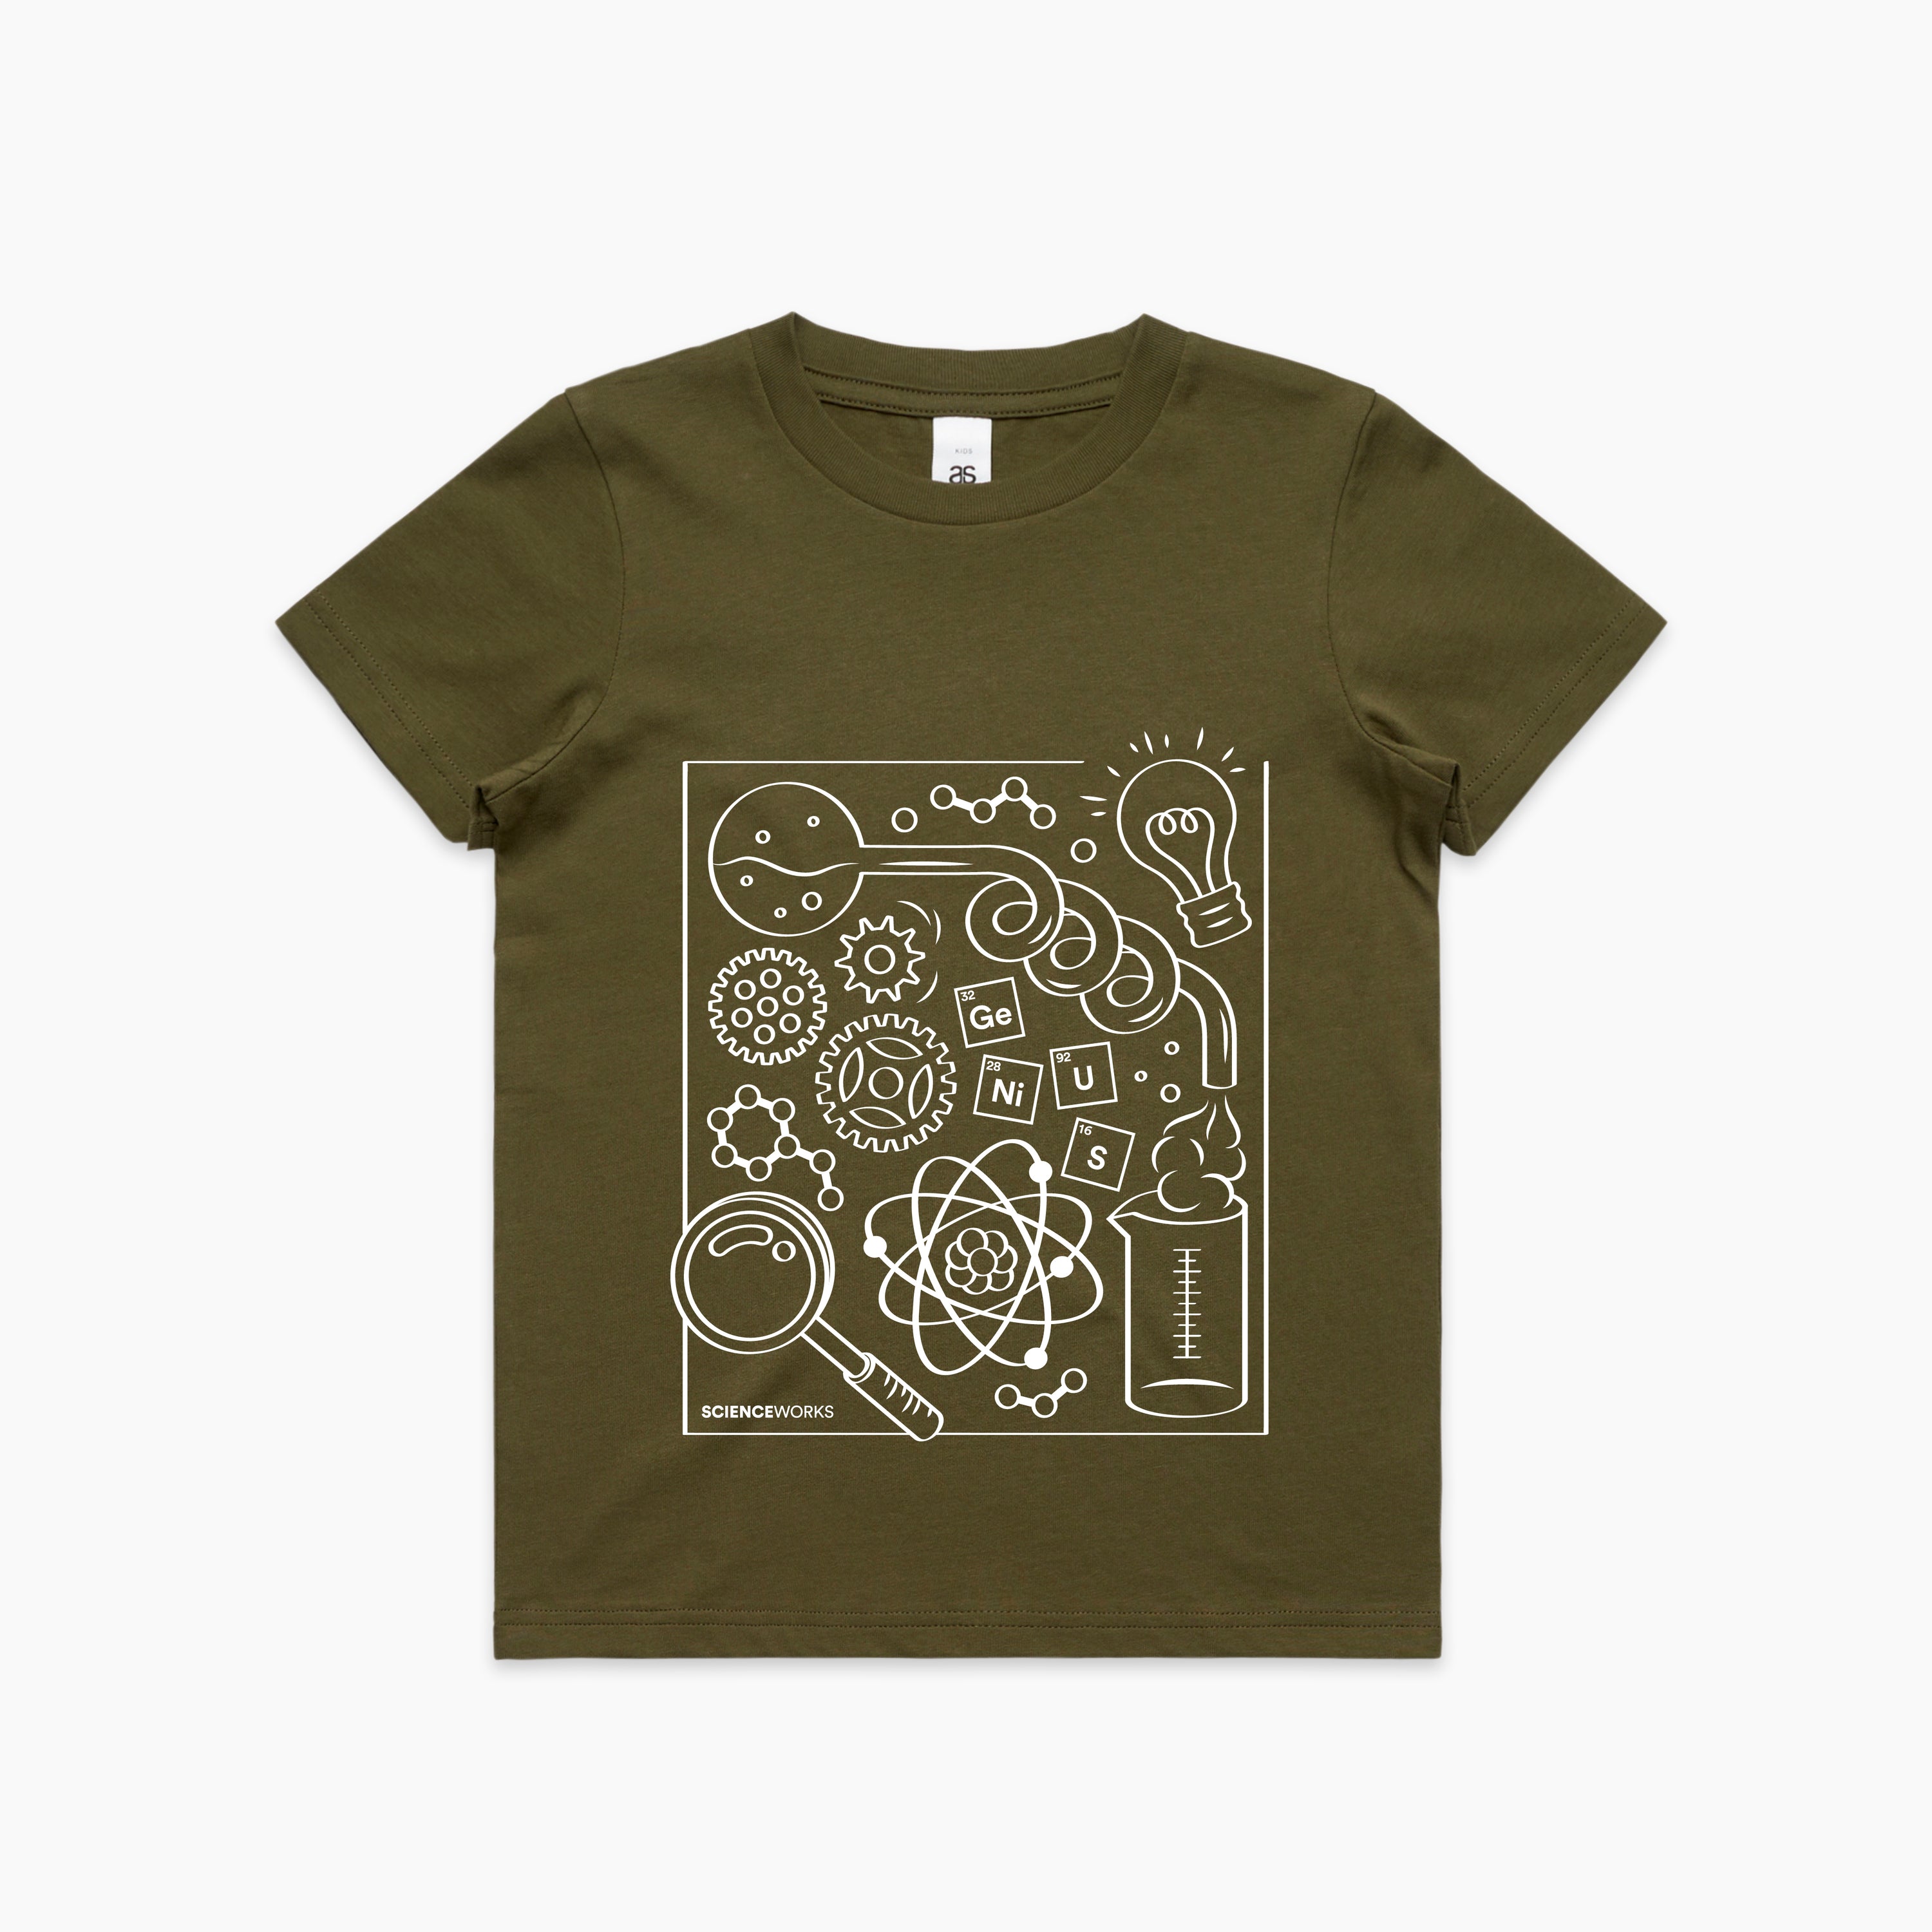 A khaki green kids tshirt with an all white illustration on the centre front. Beakers, atoms, a lightbulb, gears, and a magnifying glass are floating through the image, with elements spelling Genius in the centre. Scienceworks is written in small font at the bottom left of the image.